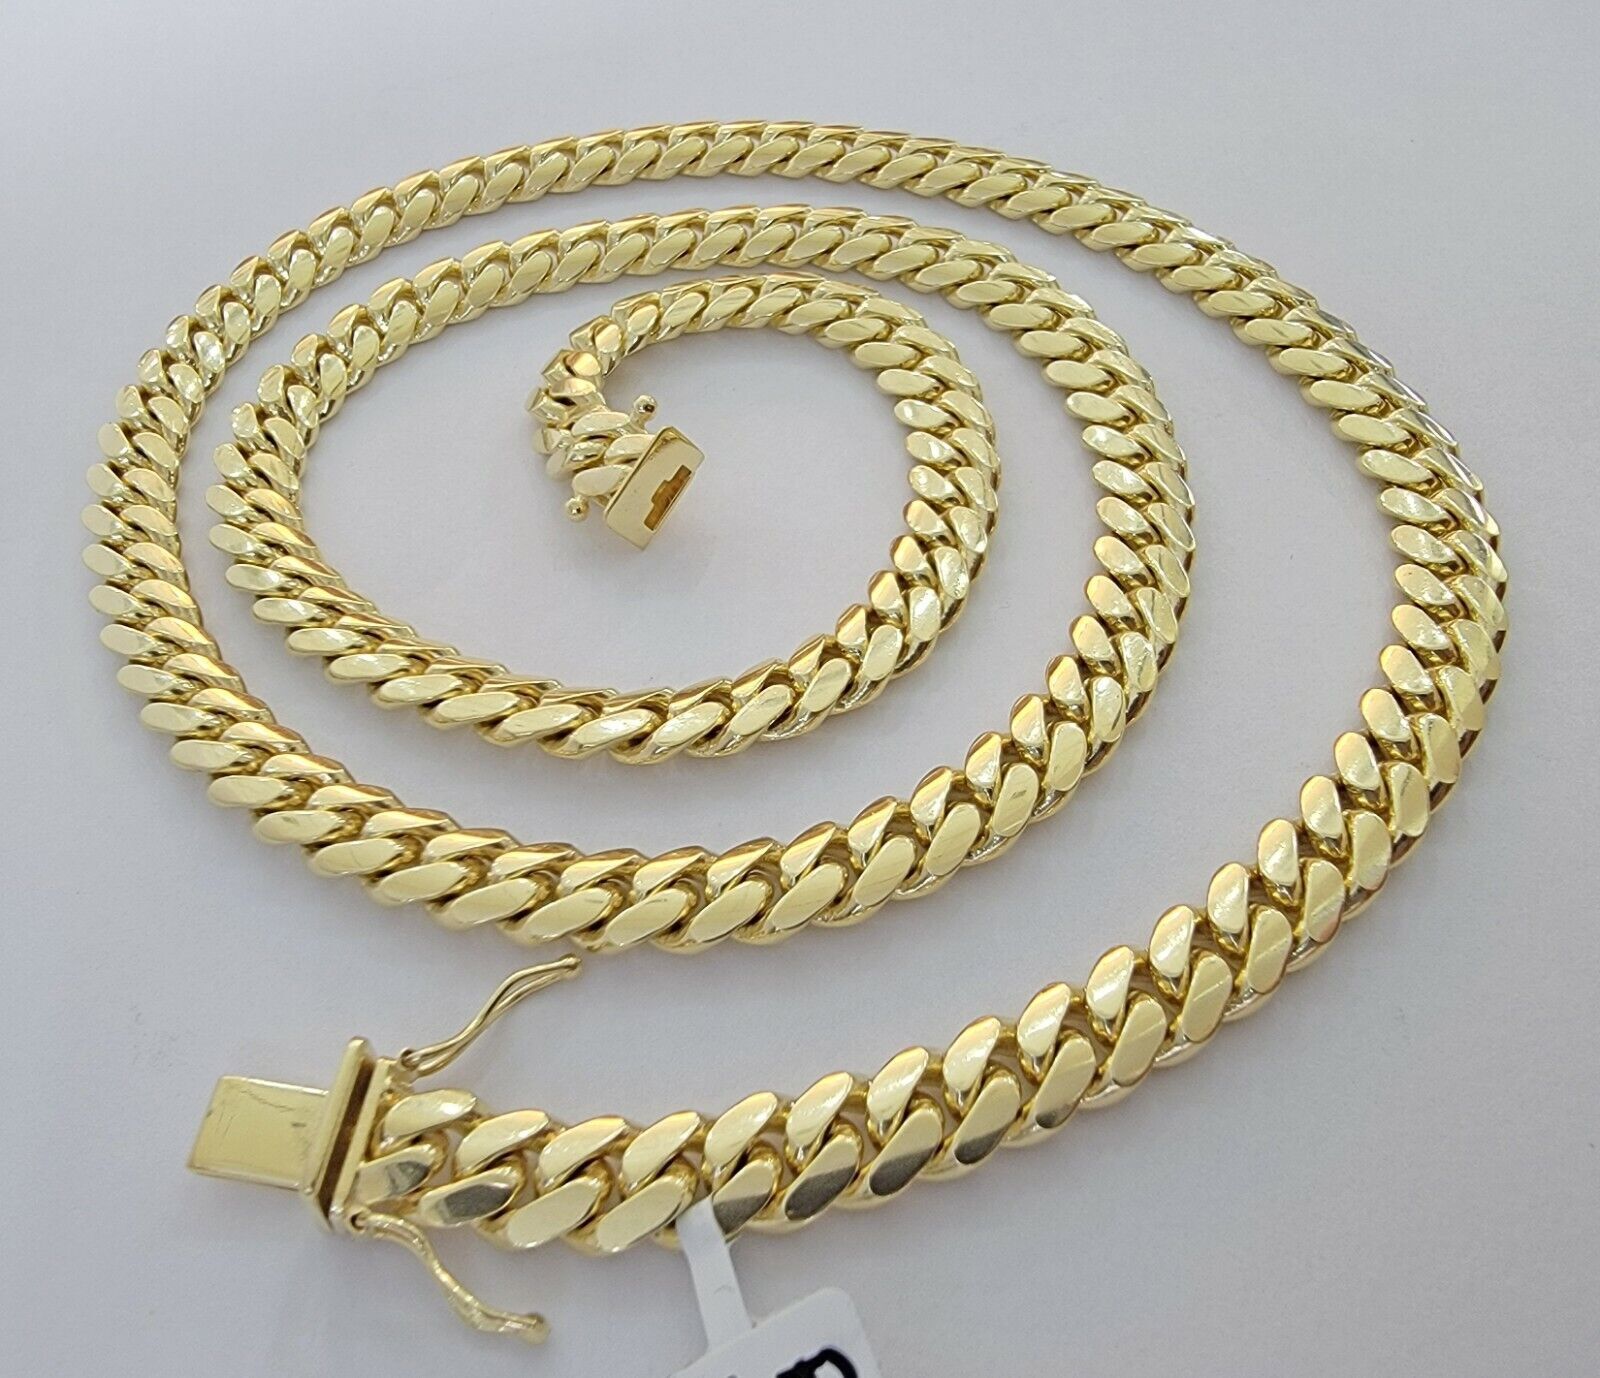 Real 14k Gold Chain 6mm Miami Cuban Link Necklace 22 Inch Men